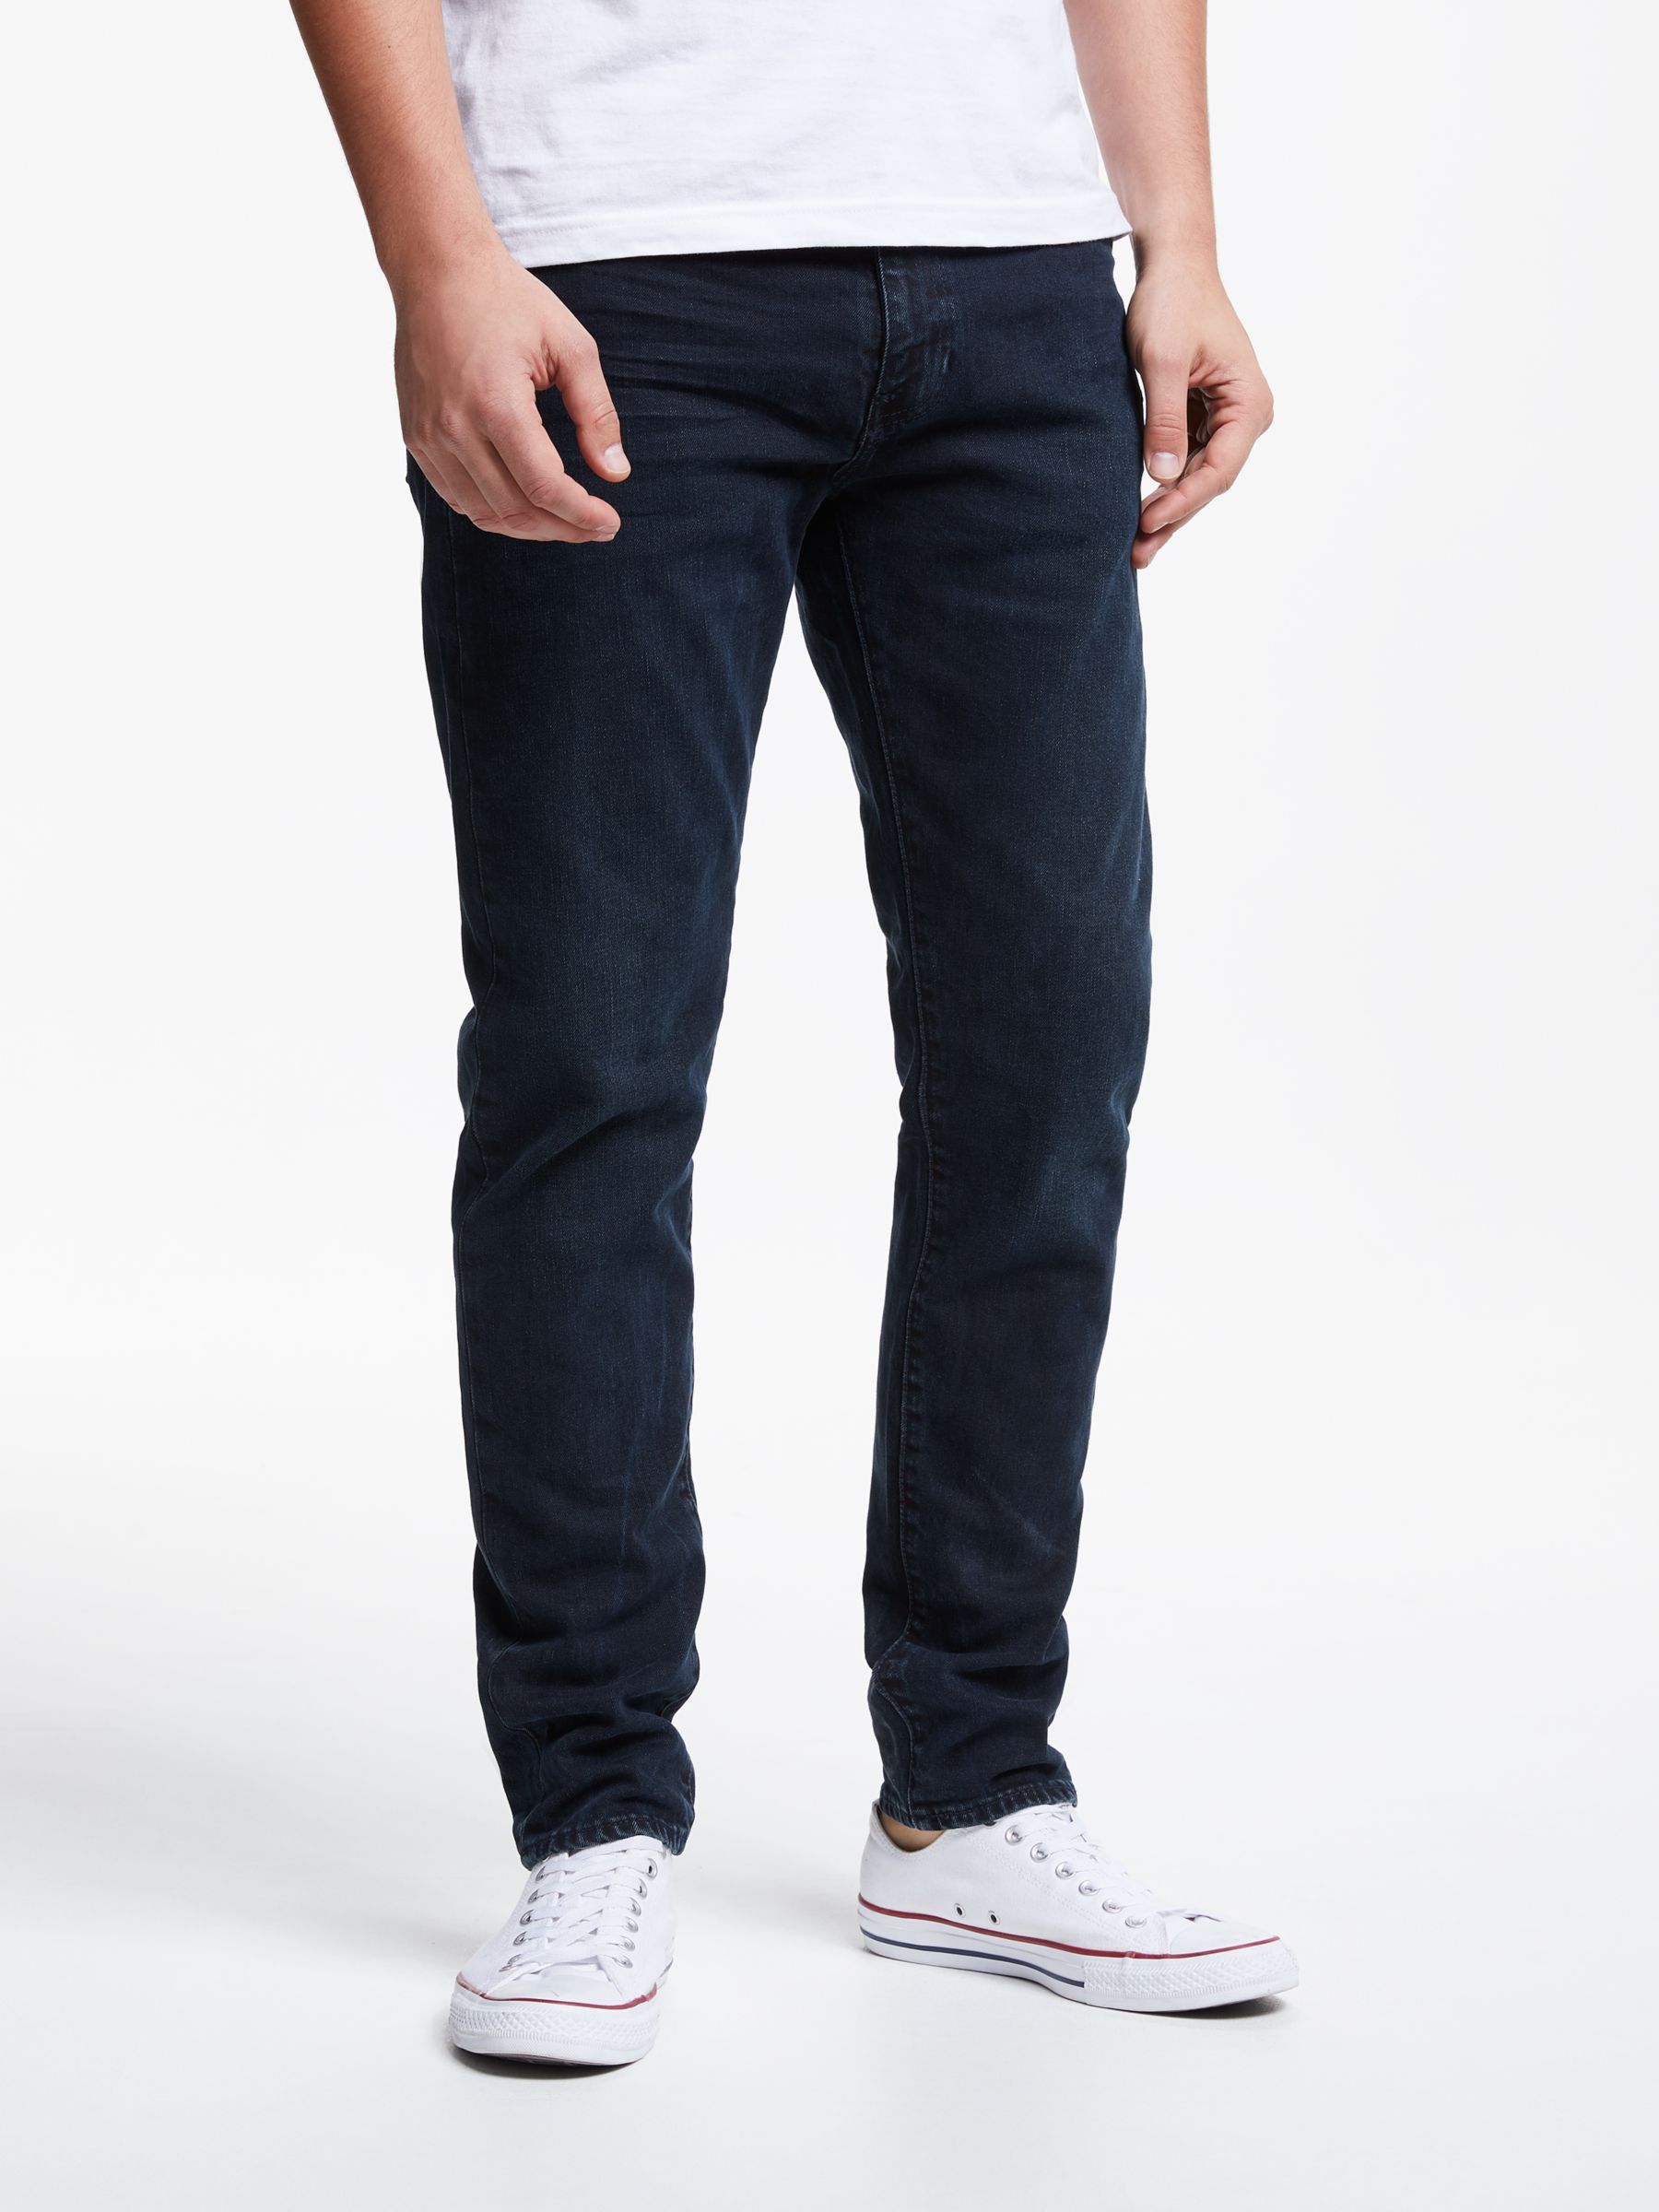 Levi's 512 Slim Tapered Jeans, Jazz at 